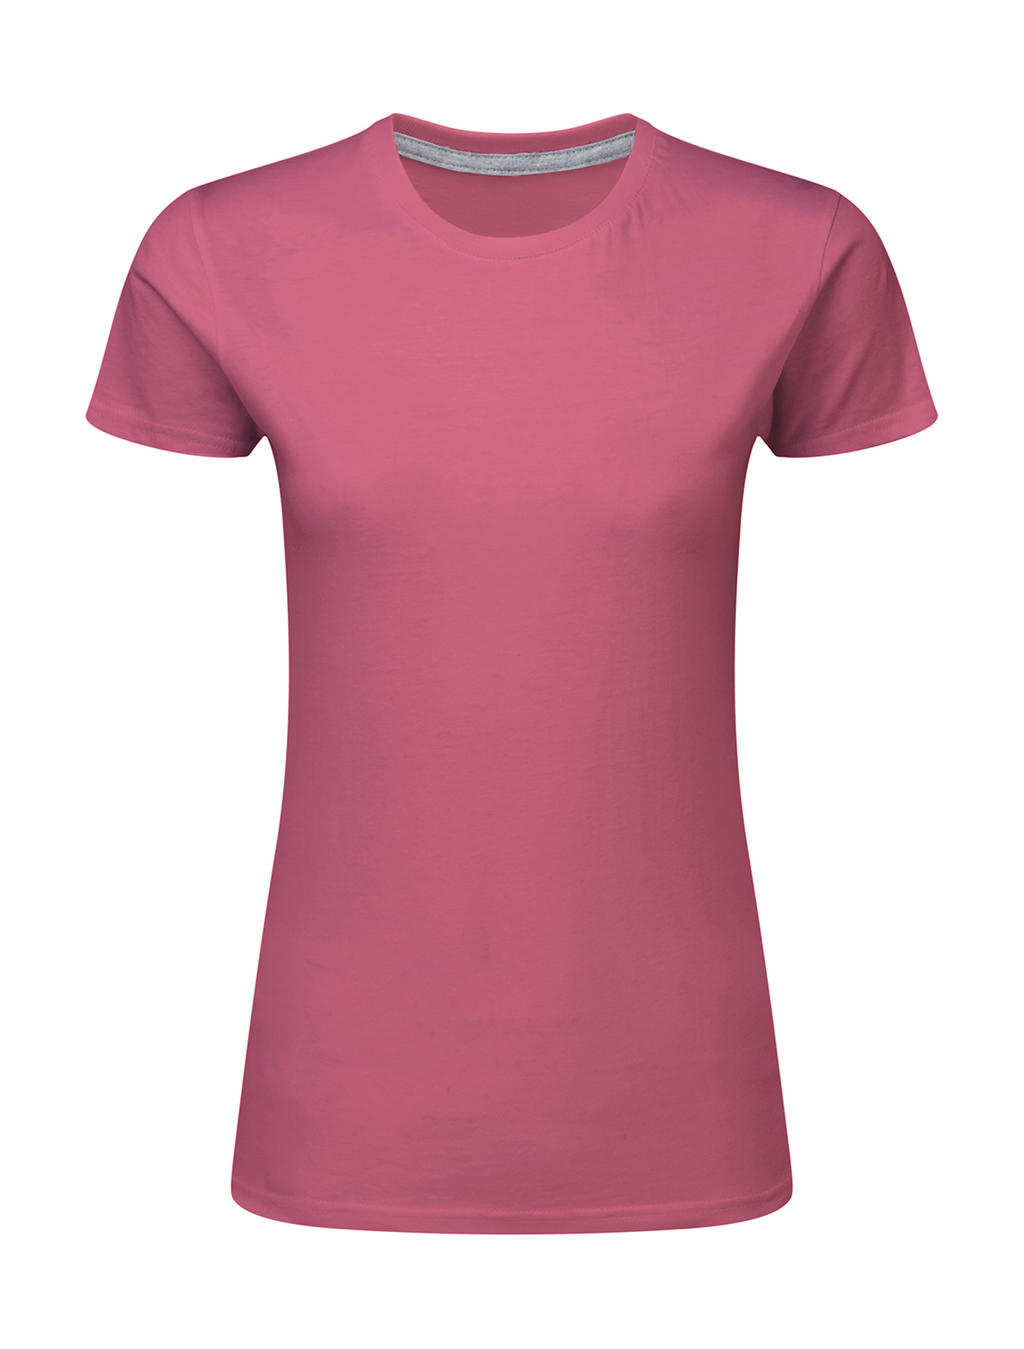  Ladies Perfect Print Tagless Tee in Farbe Cassis